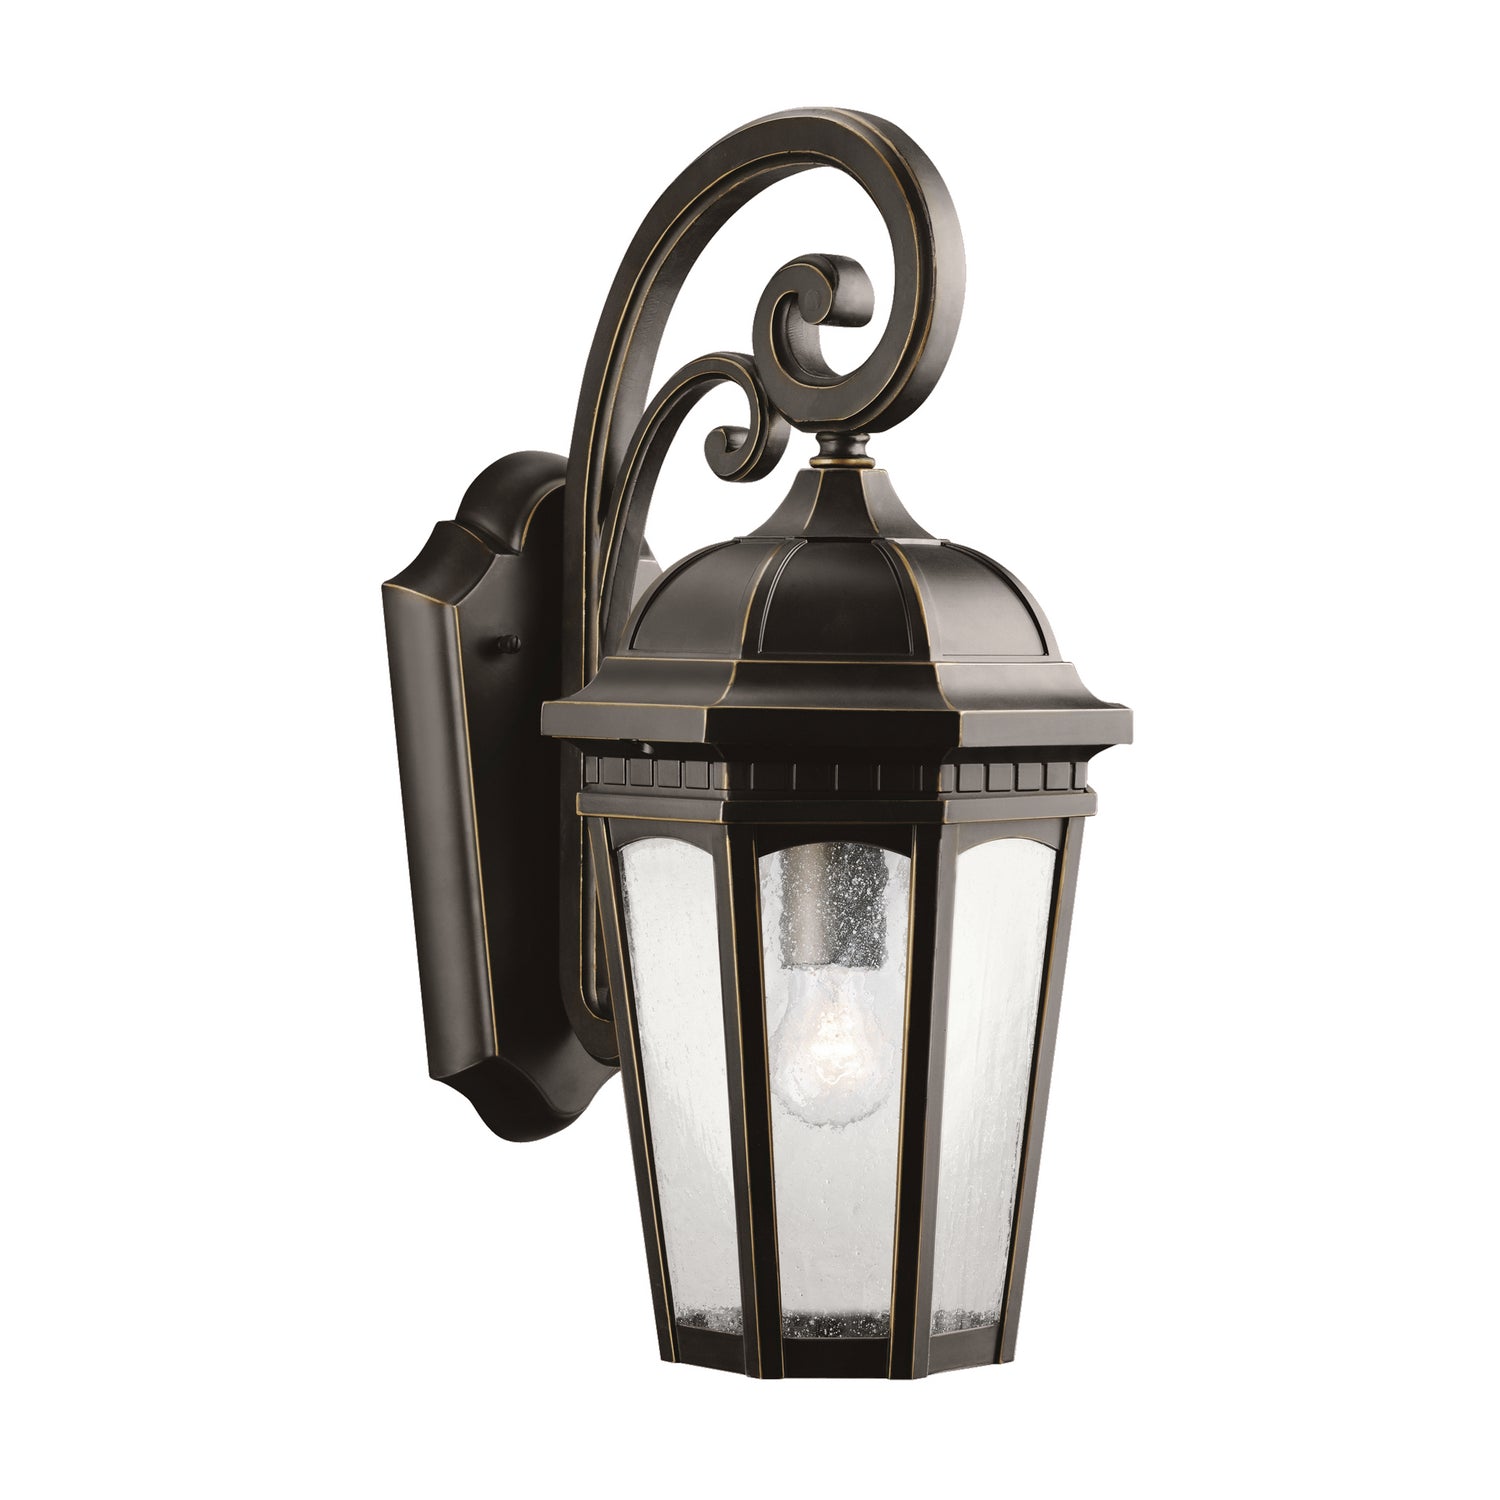 Kichler Canada - One Light Outdoor Wall Mount - Courtyard - Rubbed Bronze- Union Lighting Luminaires Decor